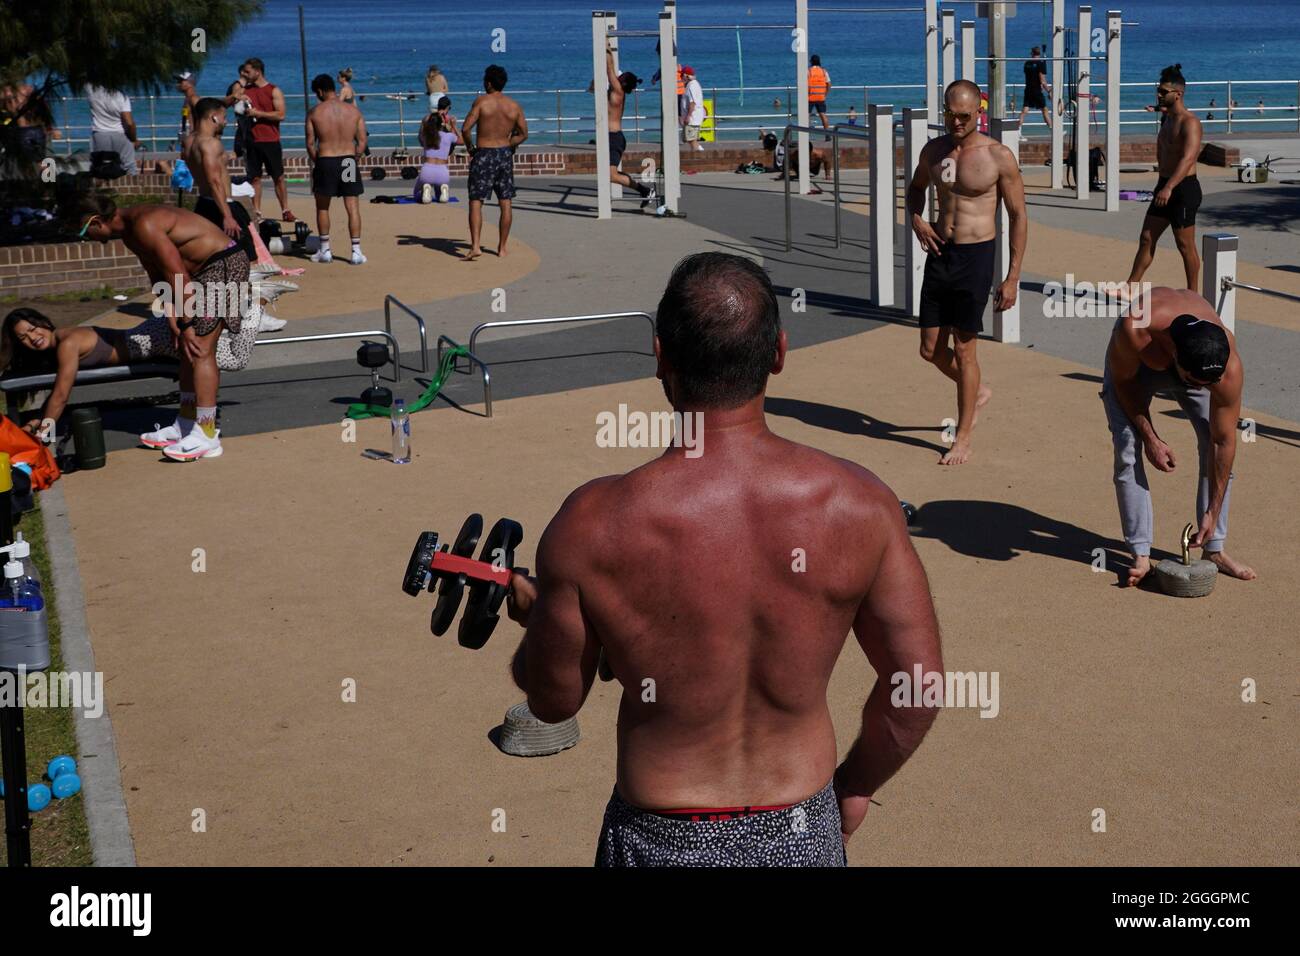 People exercise in the outdoor gym area at Bondi Beach during a lockdown to  curb the